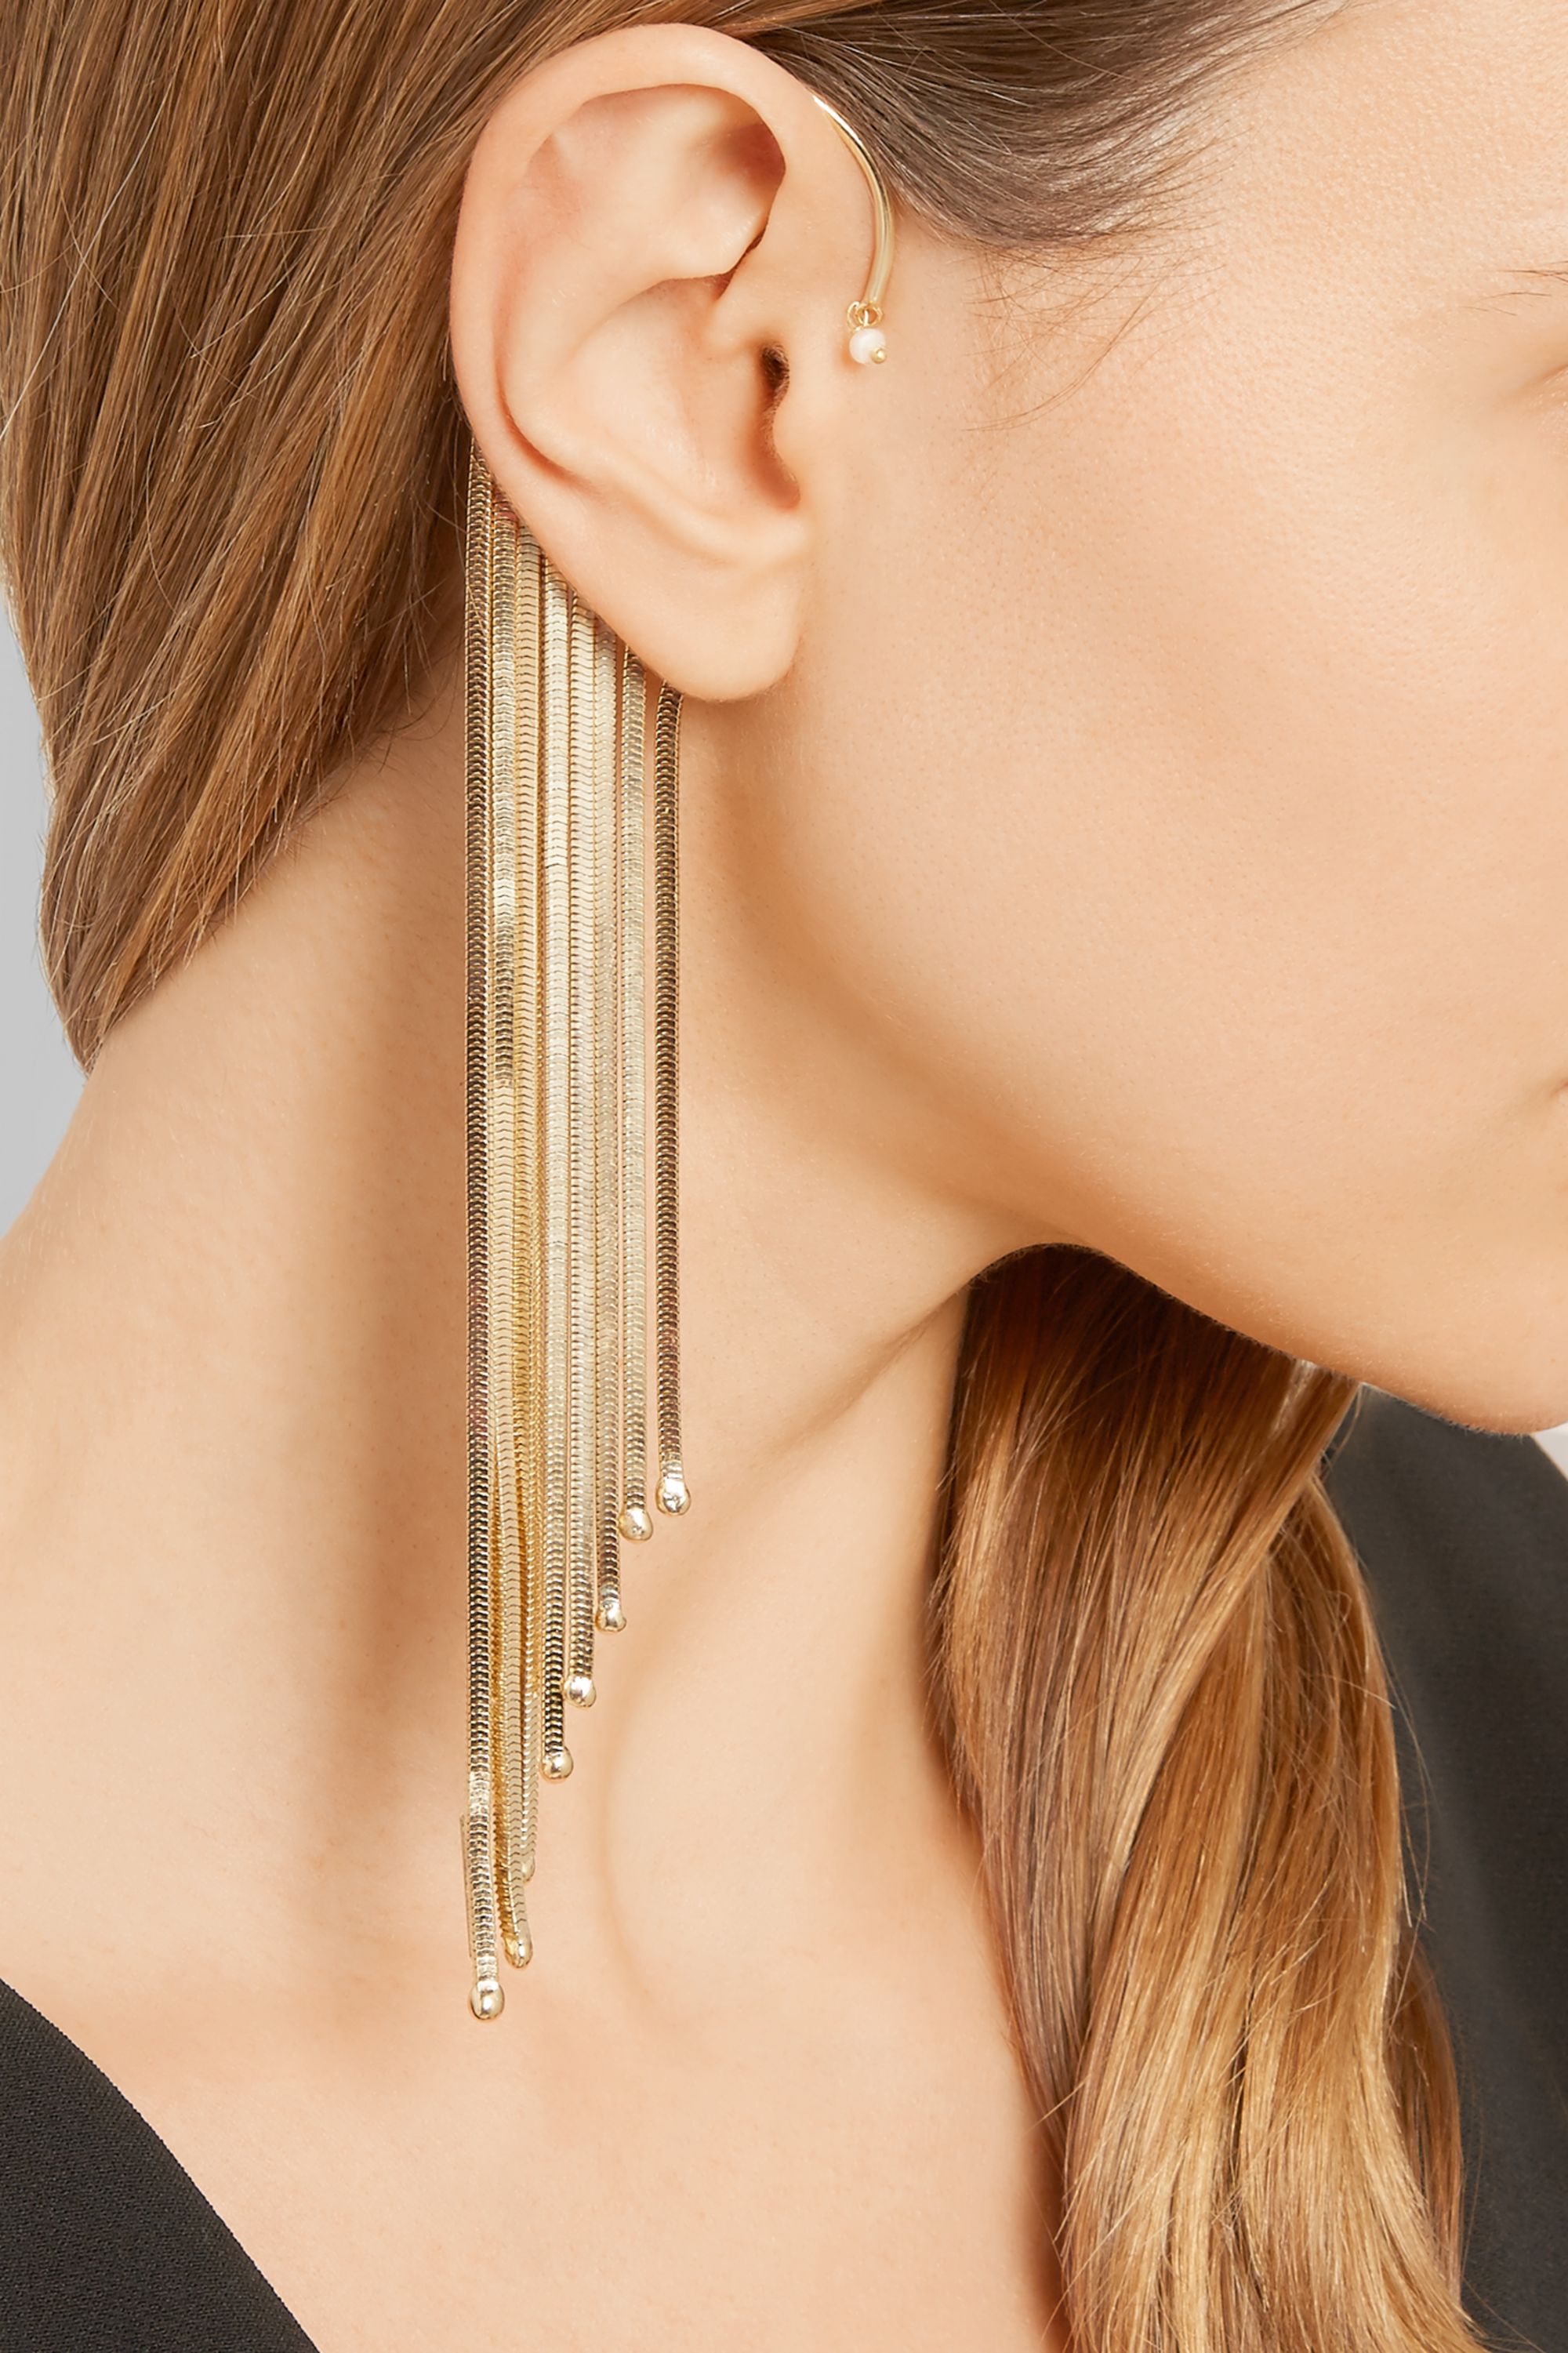 How To Wear Ear Cuffs With Trendy Style Her Style Code